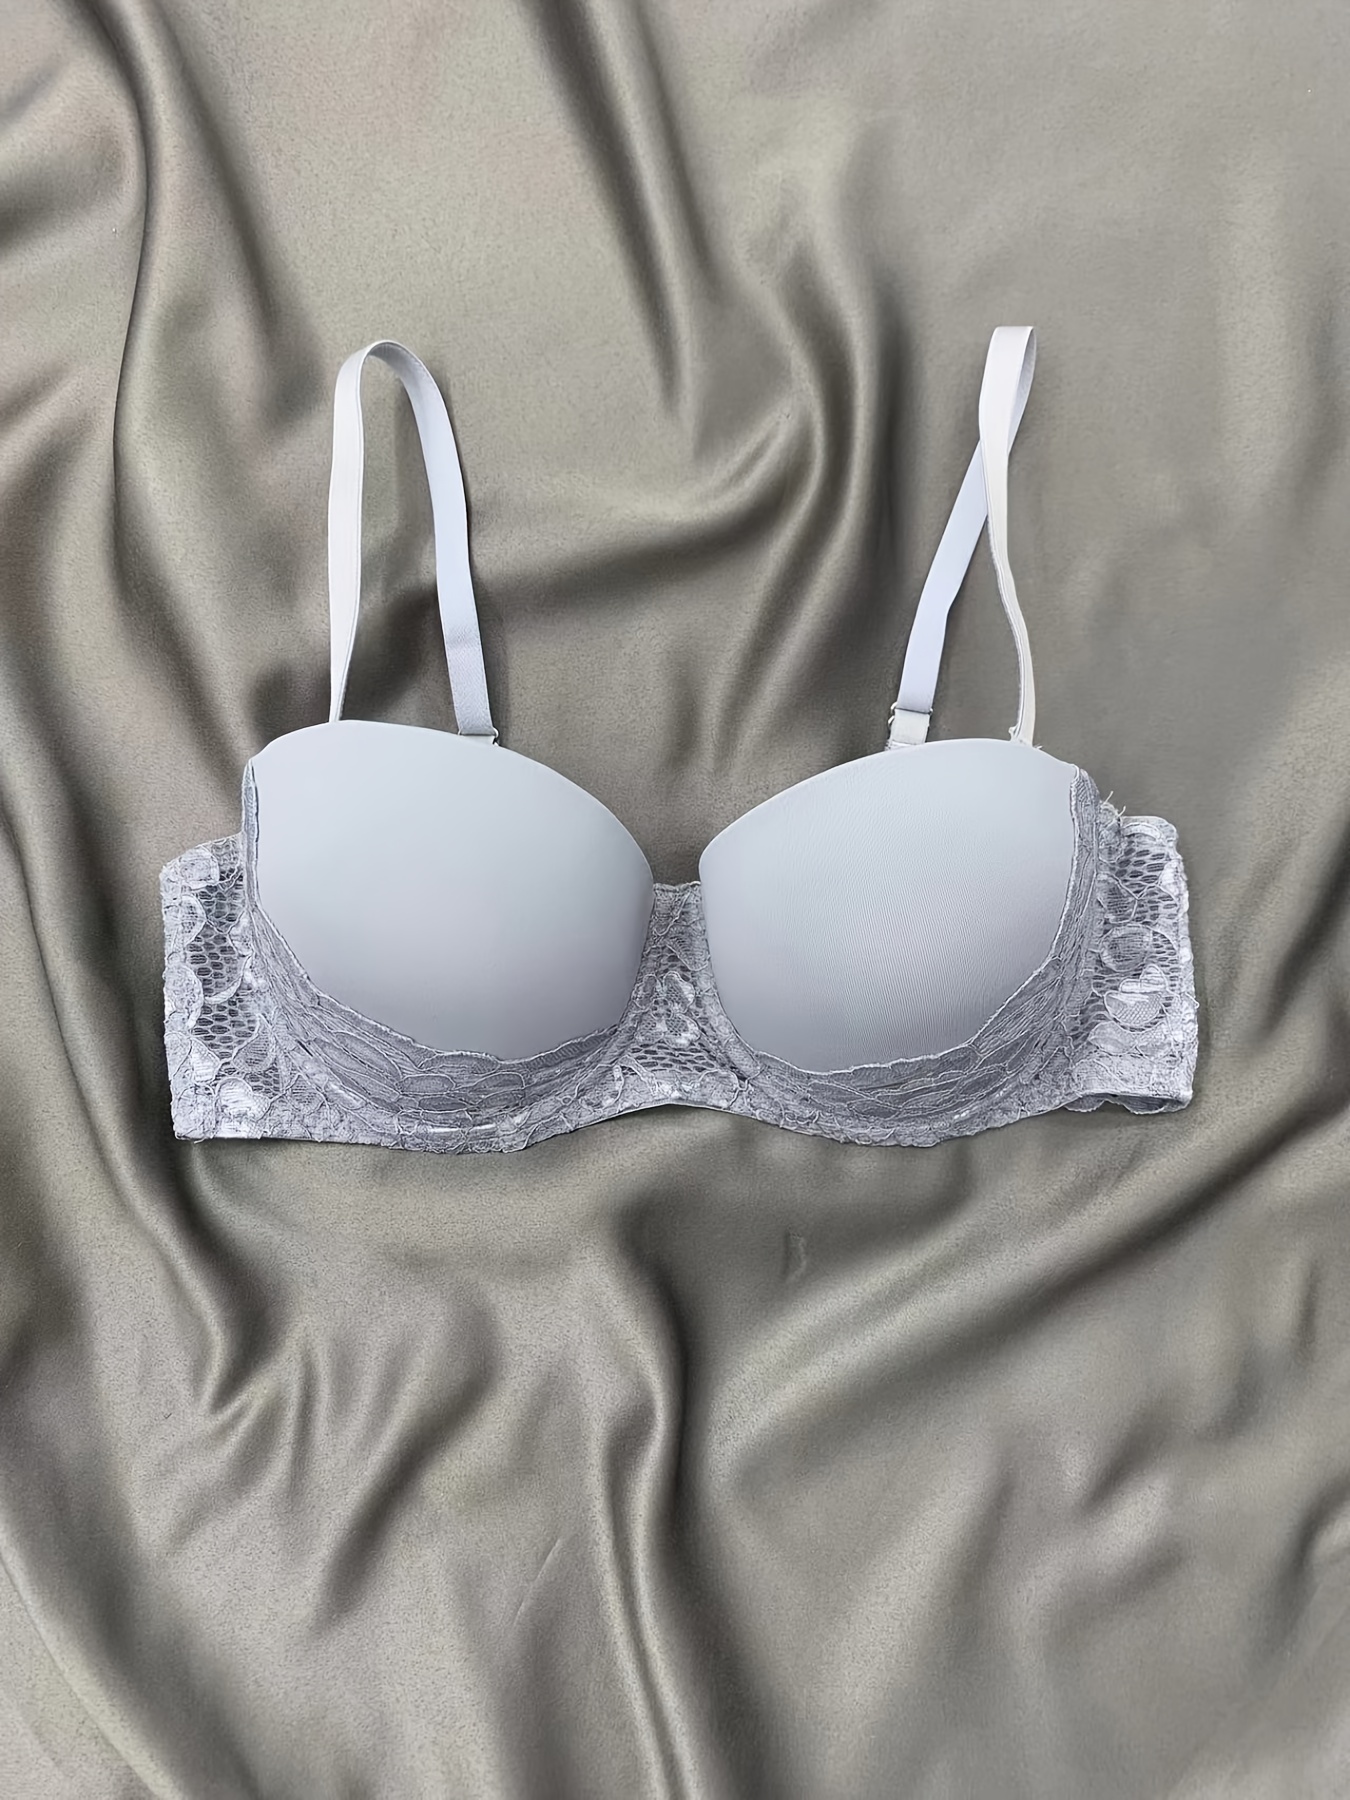 Womens White Lace Bras With Underwire Ultra Thin Soft Push Up